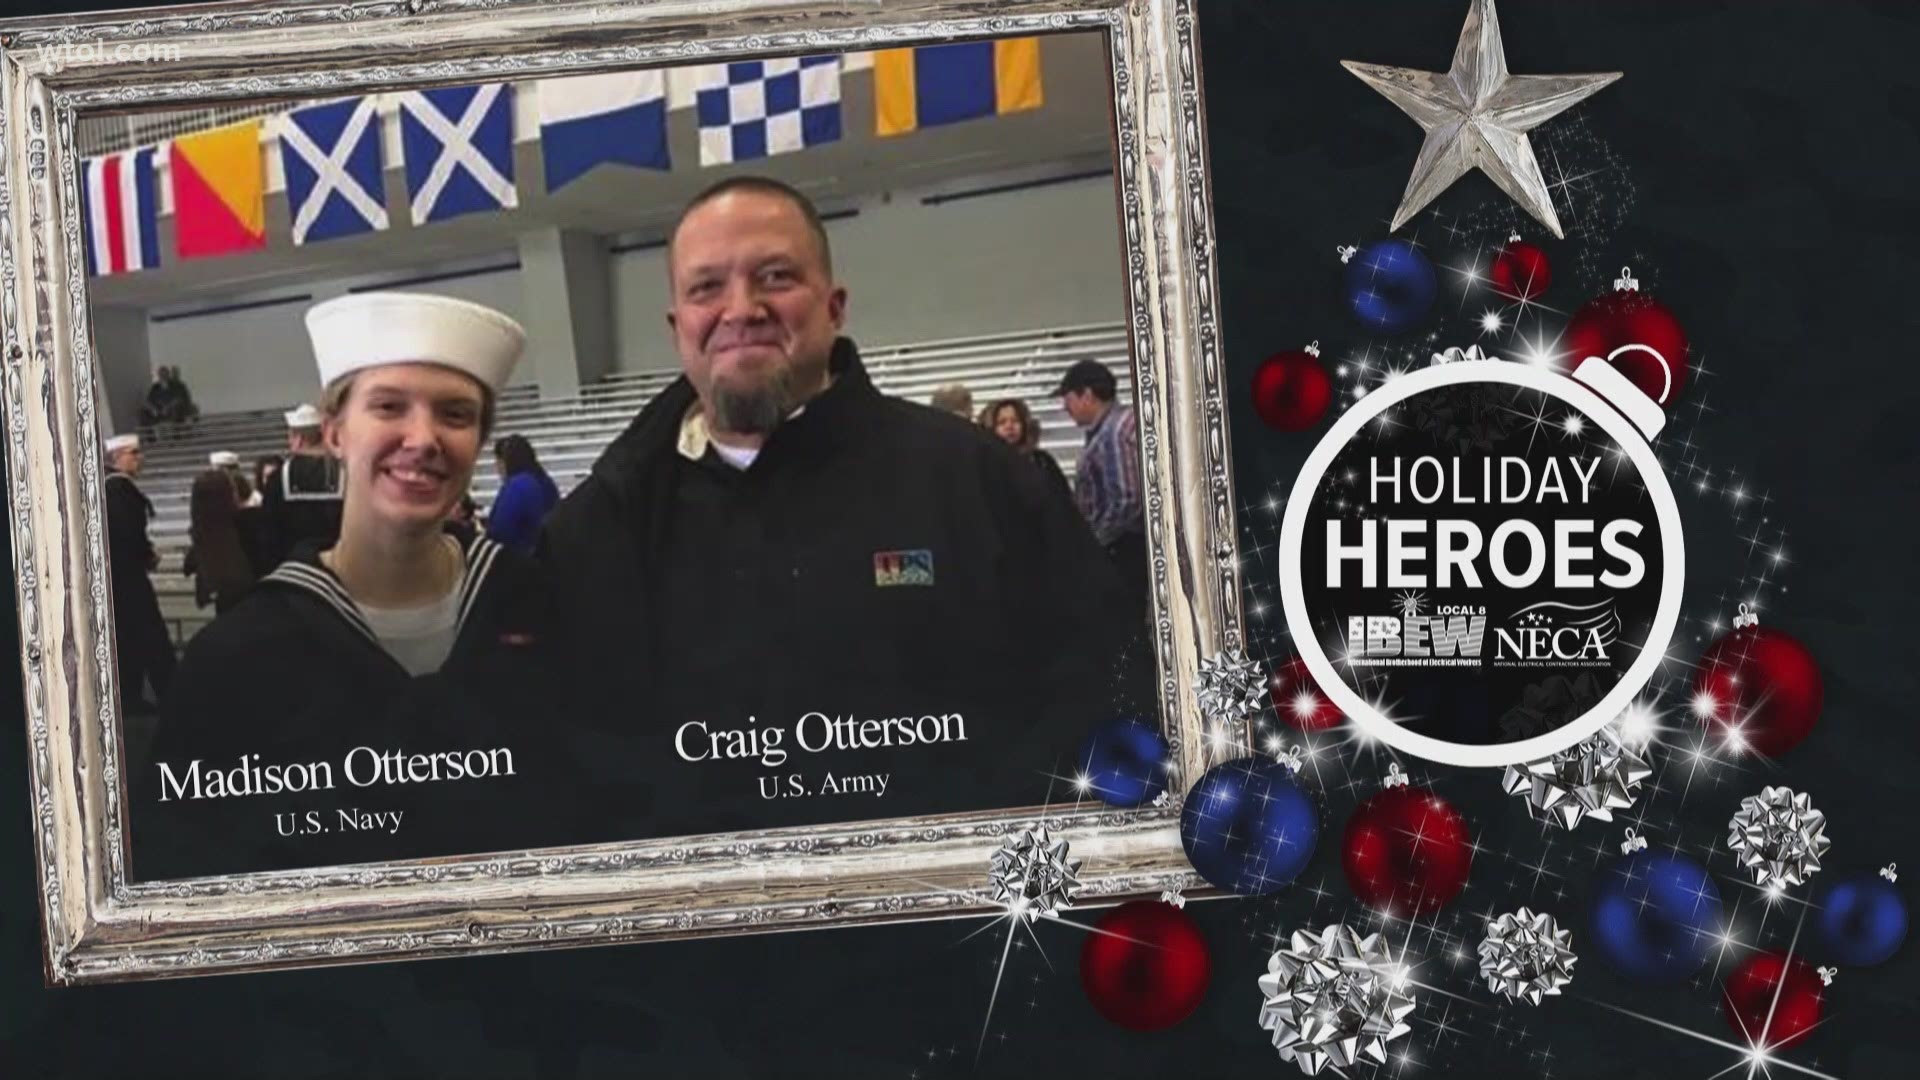 Let's take a moment to honor Tuesday's holiday heroes! Craig and Madison Otterson are a father-daughter duo serving our country past and present!